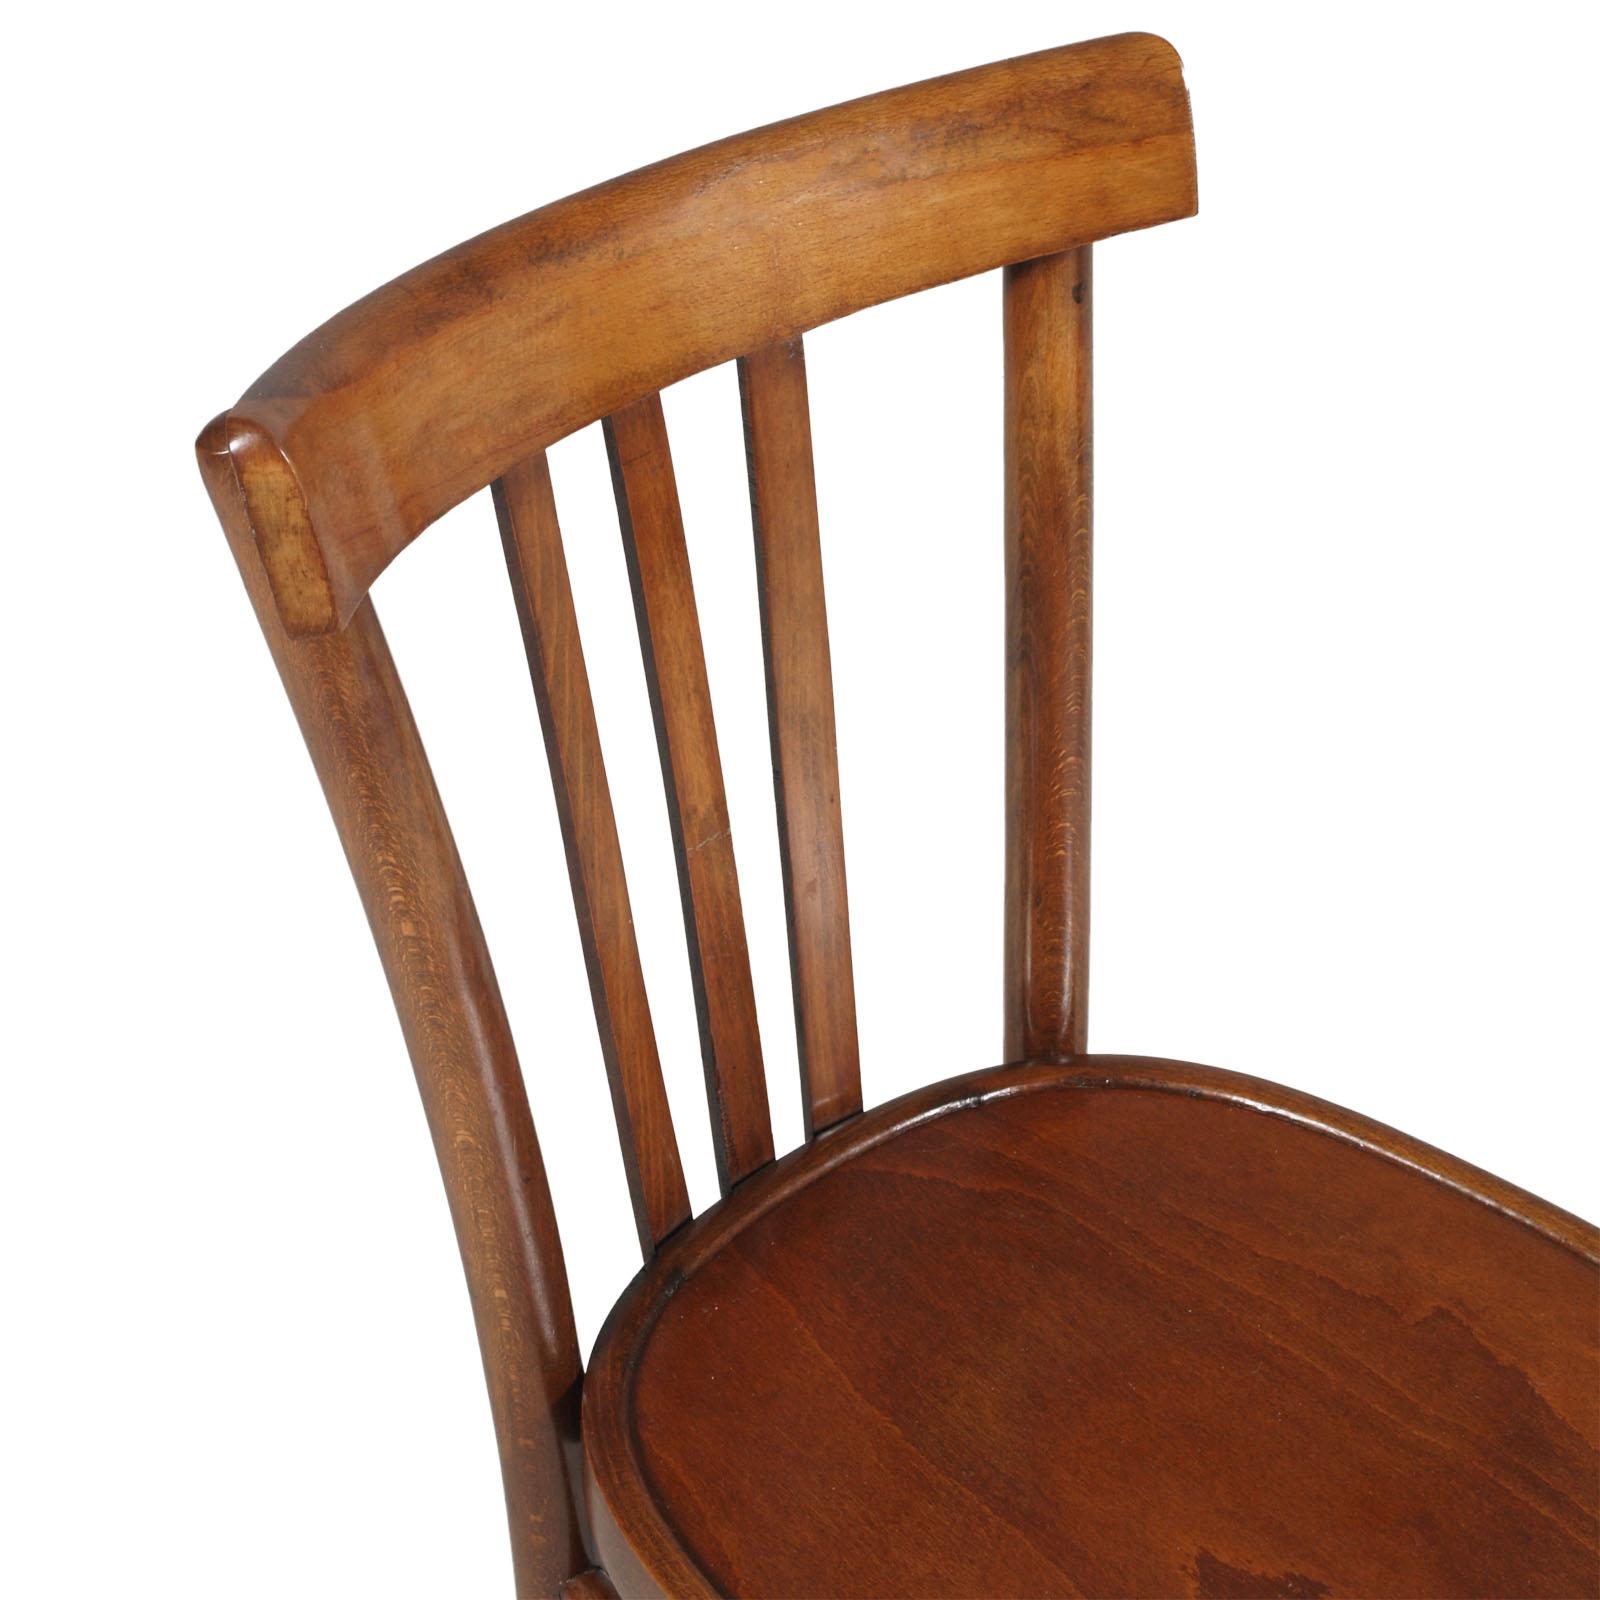 Robust Italian Mid-Century Modern kitchen chair in walnut restored and wax polished
Measures cm: H 48\85, W 38, D 48.